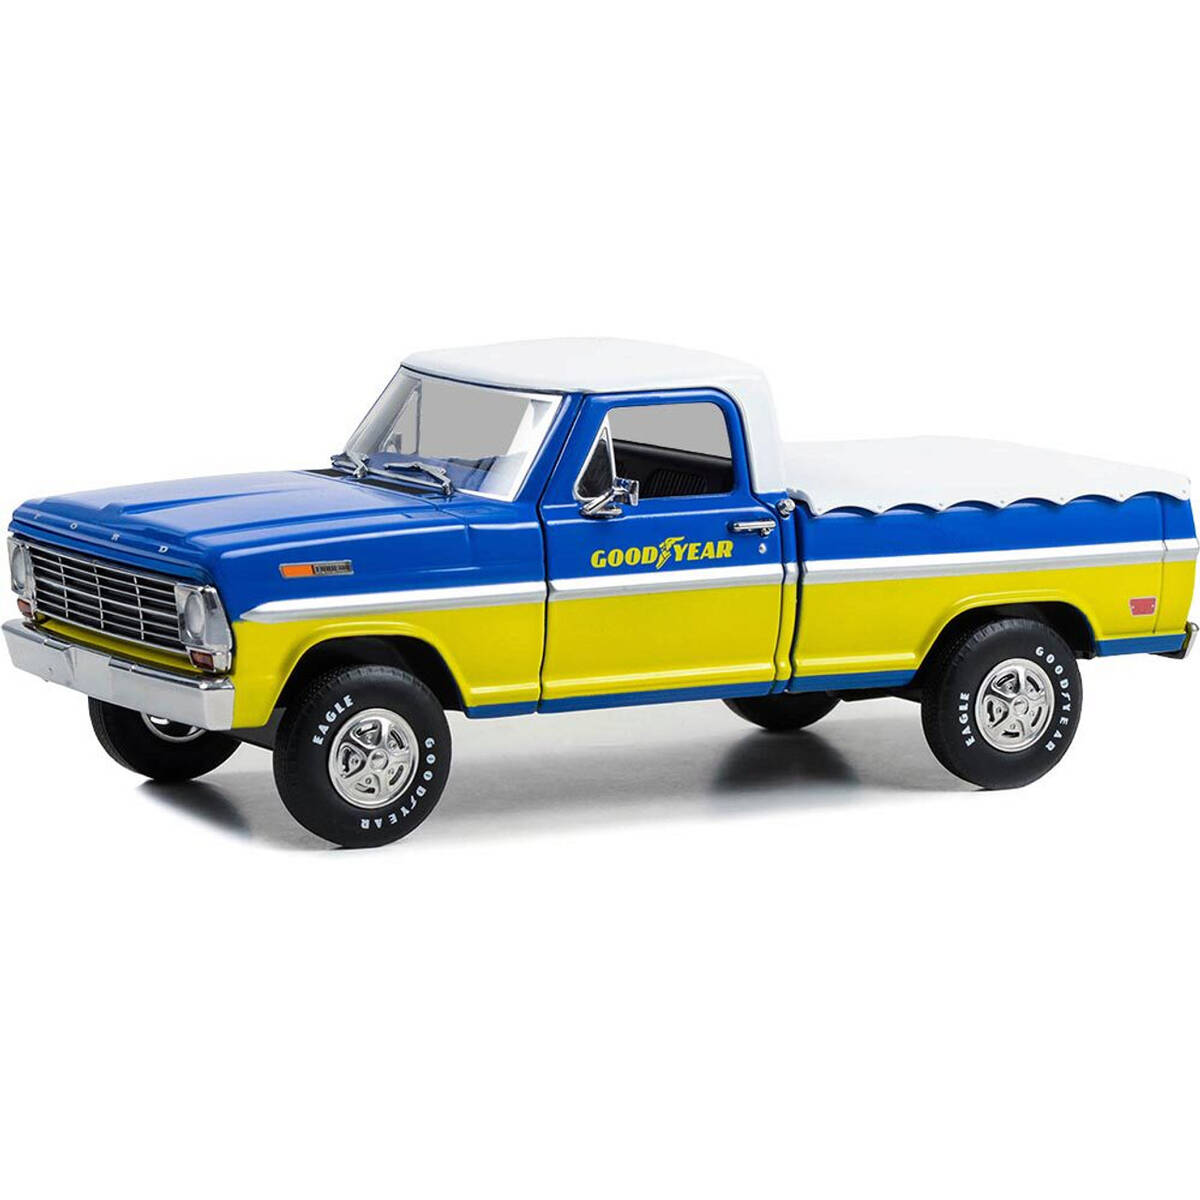 Greenlight 1/24 Running on Empty Series 6- 1969 Ford with Bed Cover - Goodyear Tires 85070-C